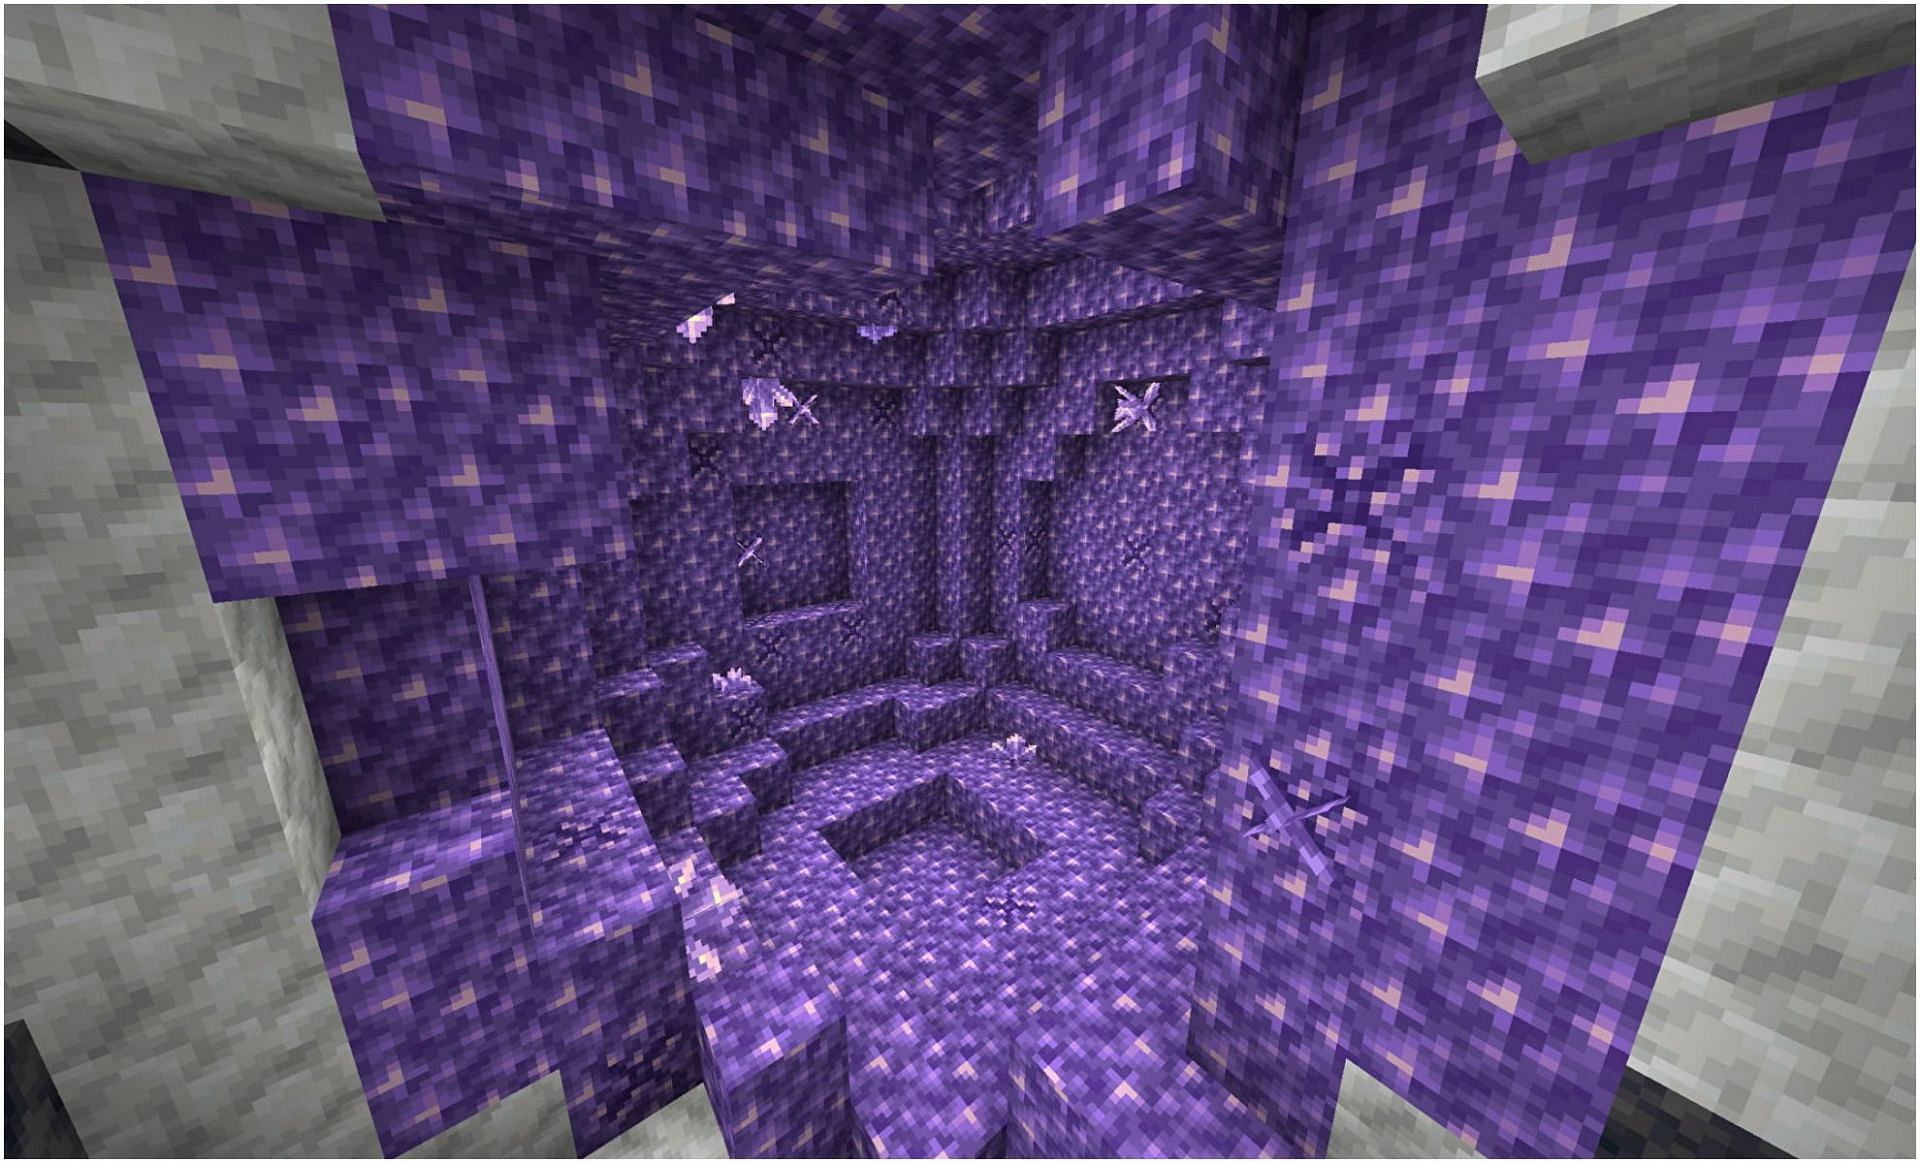 An Amethyst geode, where amethyst clusters can be found (Image via Minecraft)